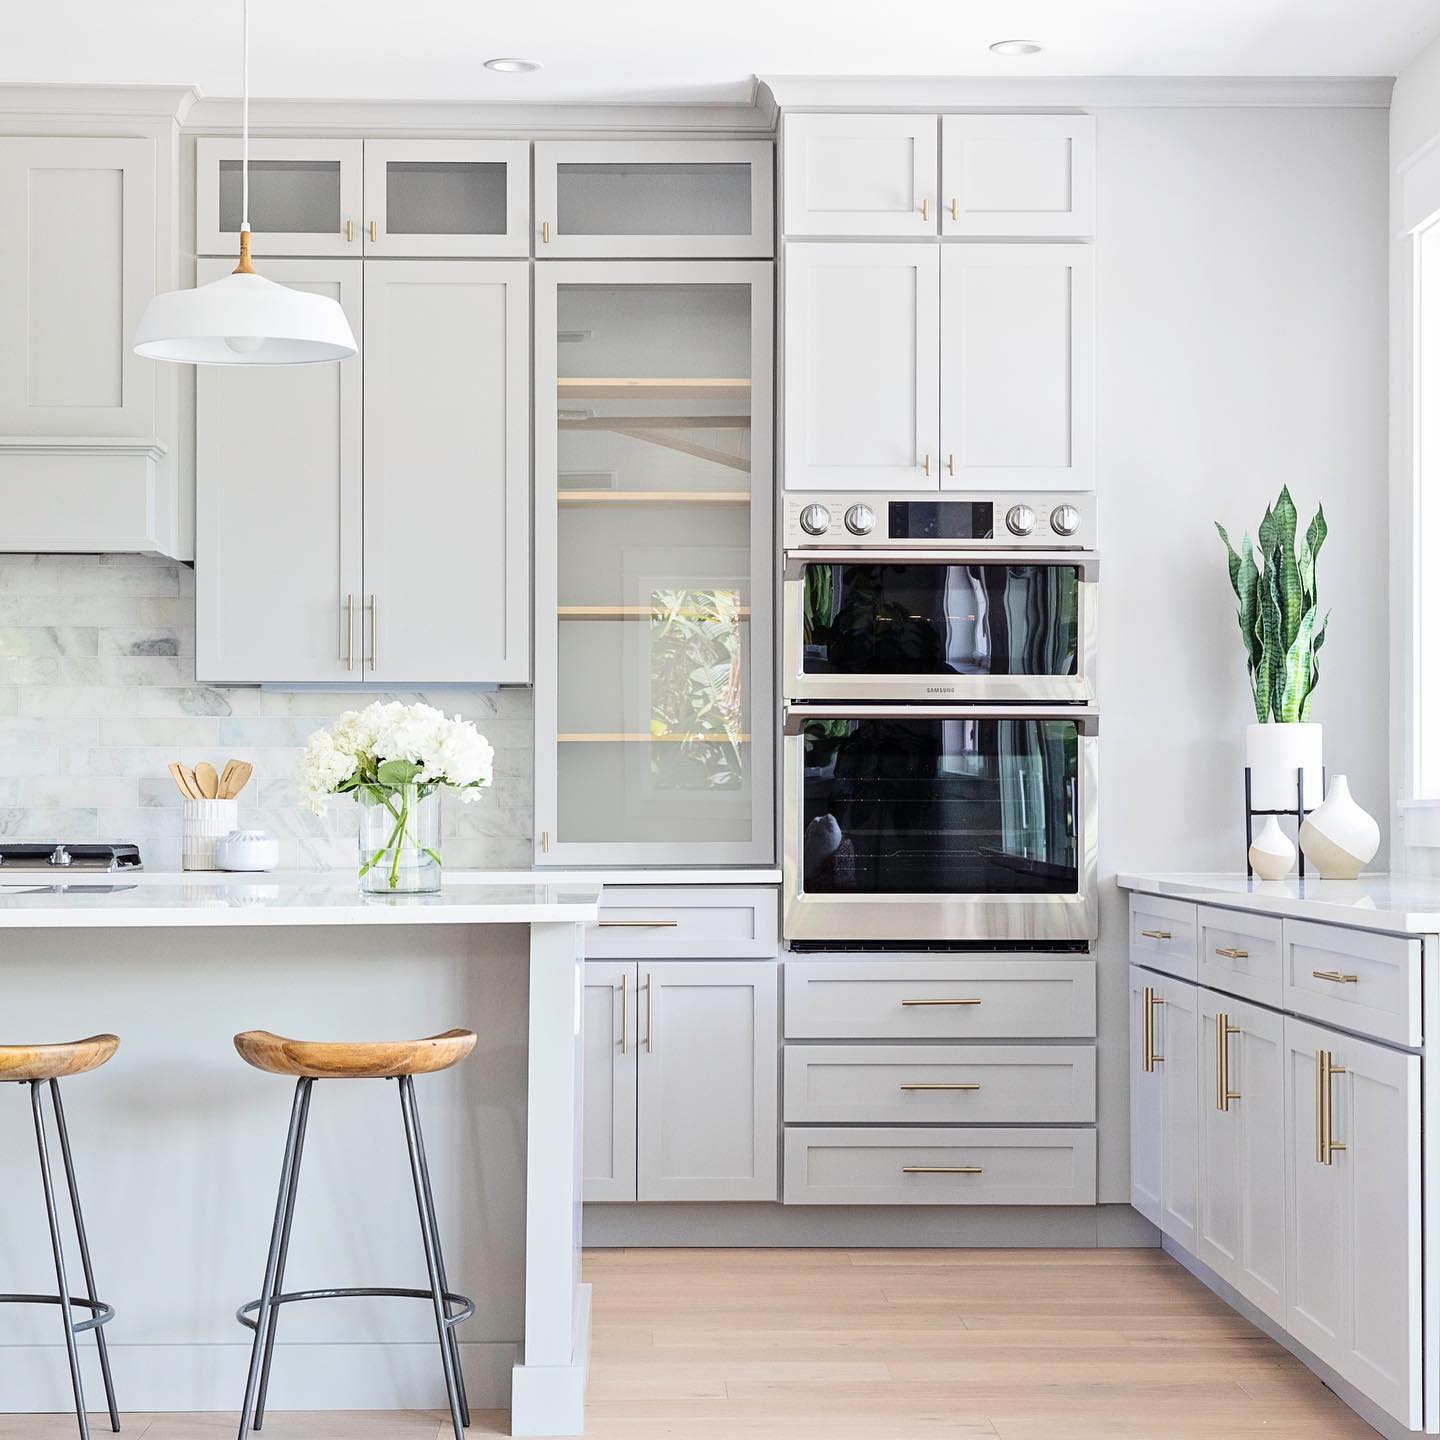 How to Design a Minimalist Kitchen That's Both Functional and Beautiful